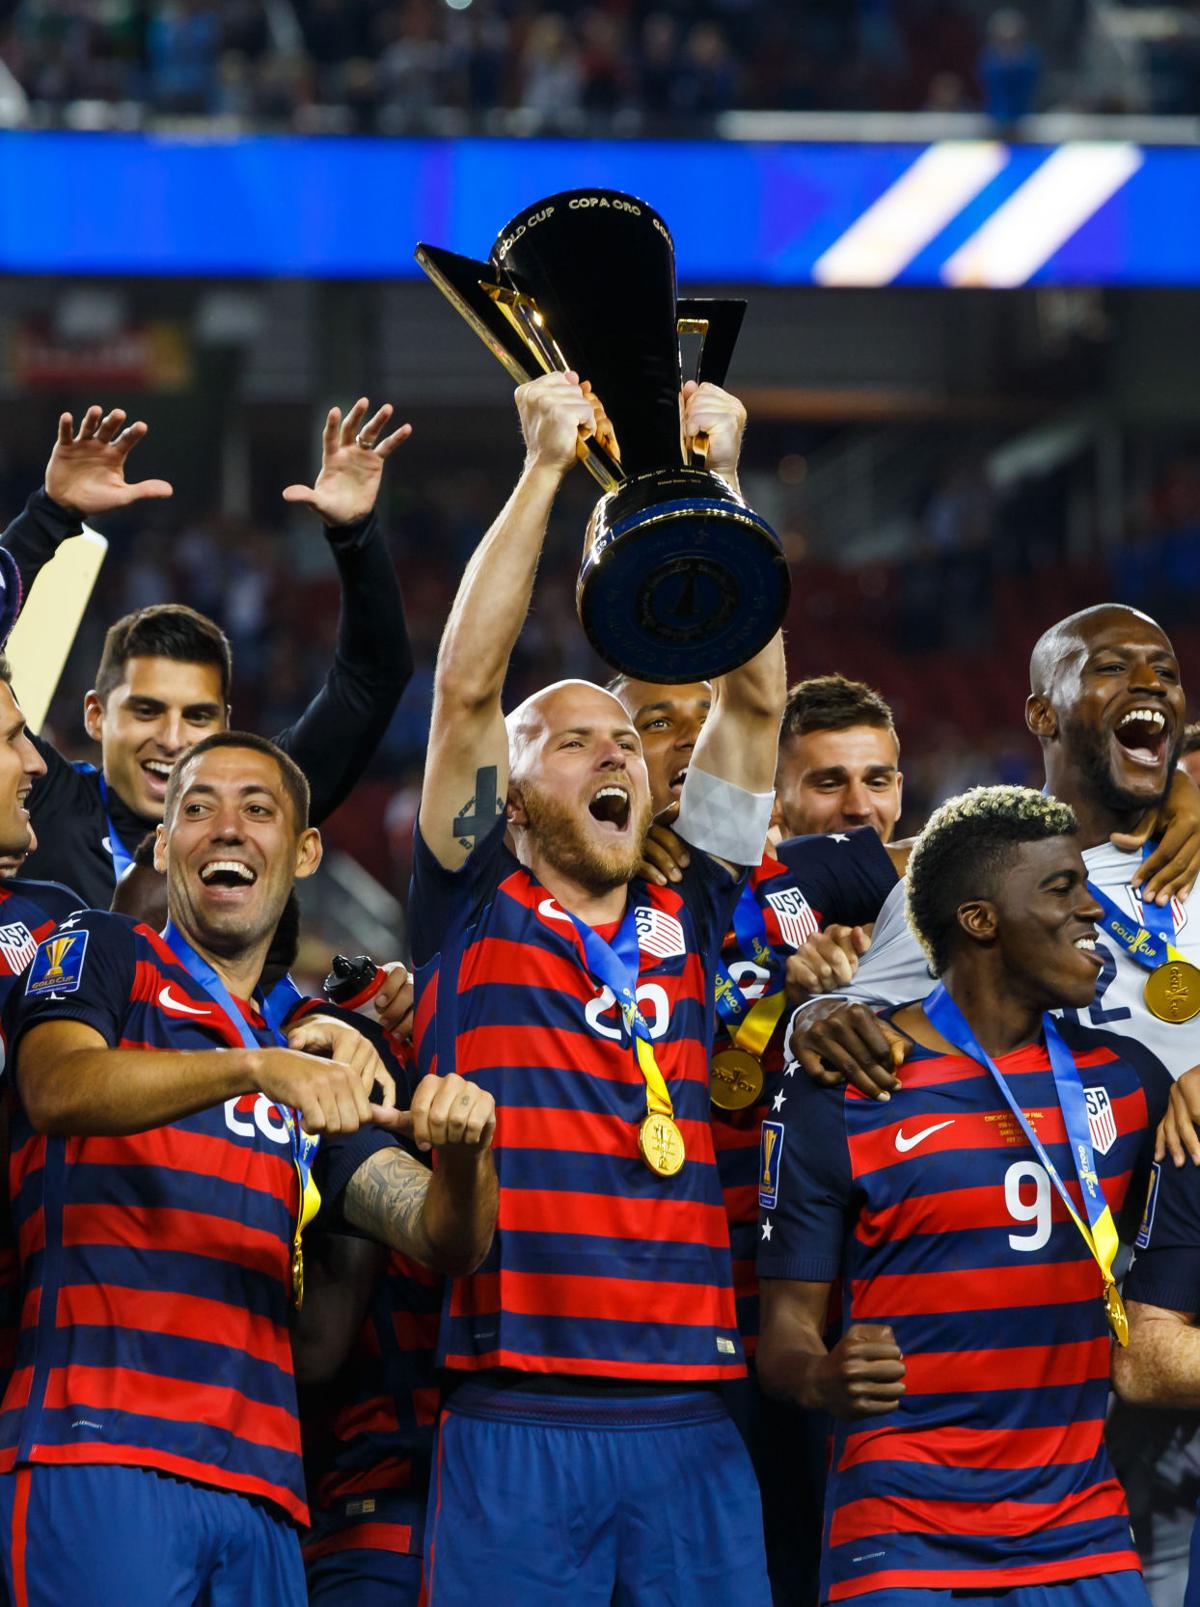 United States wins Gold Cup | Slideshows | gwinnettdailypost.com